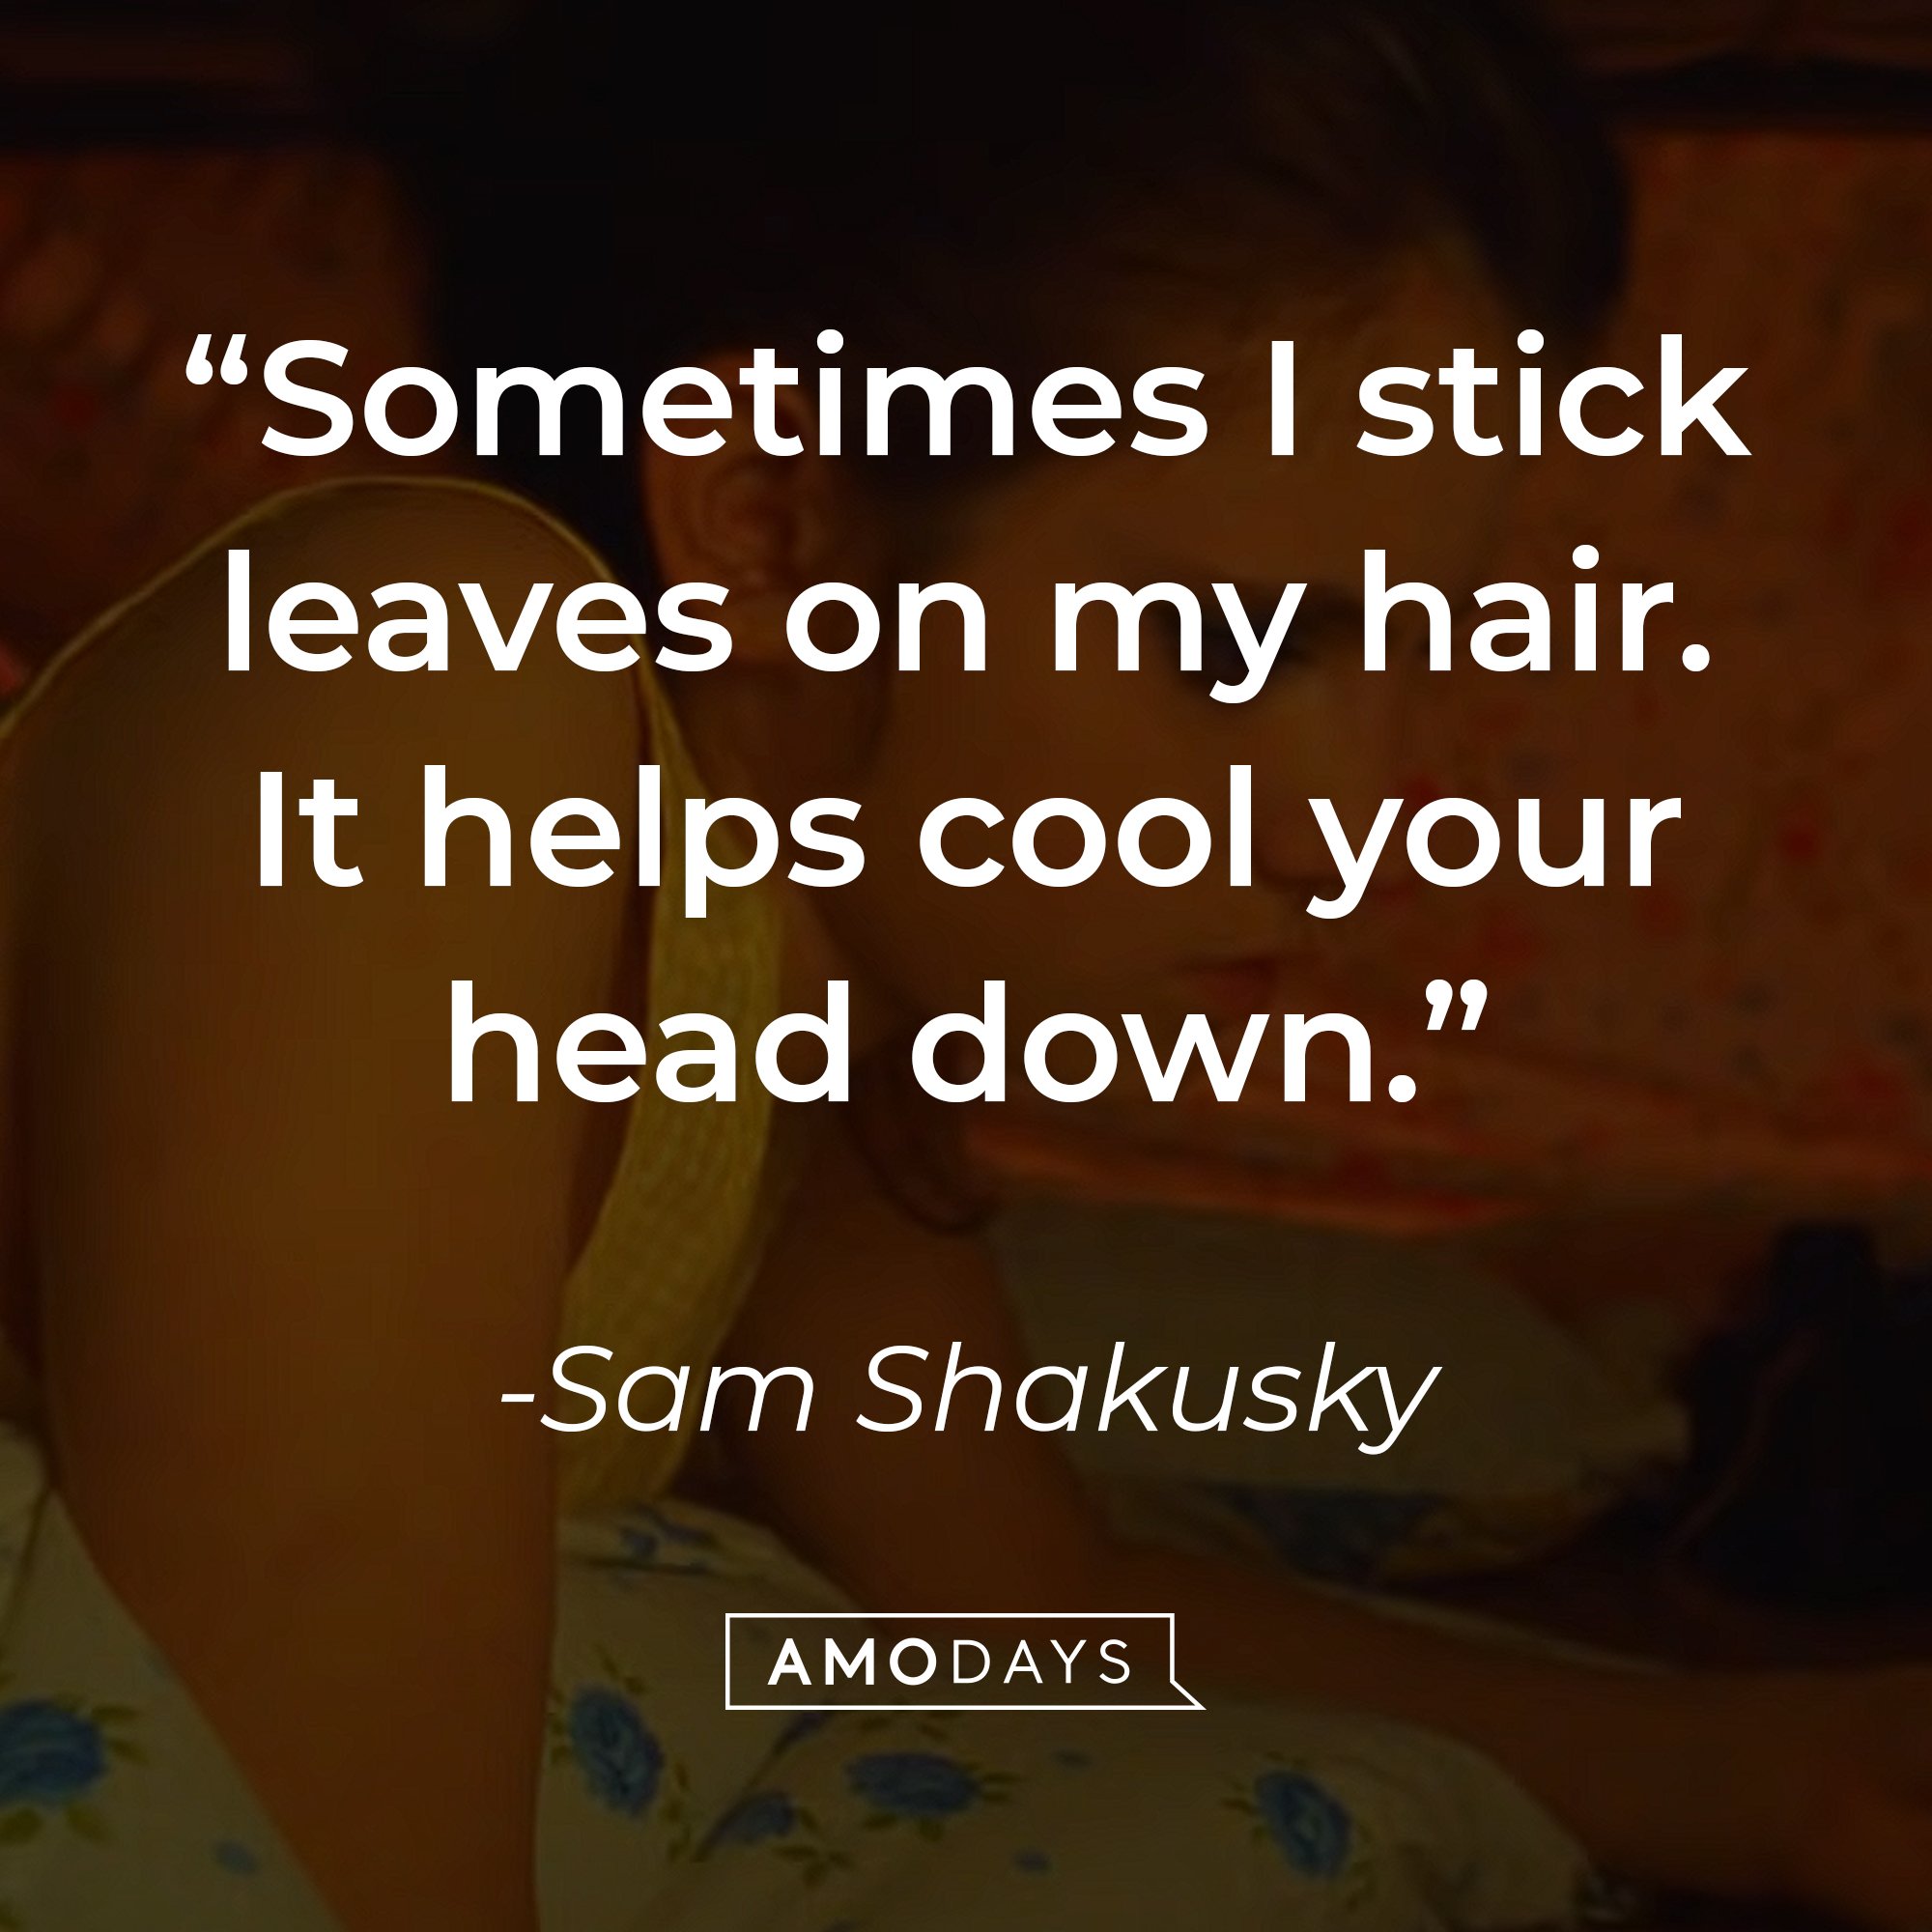 Sam Shakusky's quote: "Sometimes I stick leaves on my hair. It helps cool your head down." | Image: AmoDays